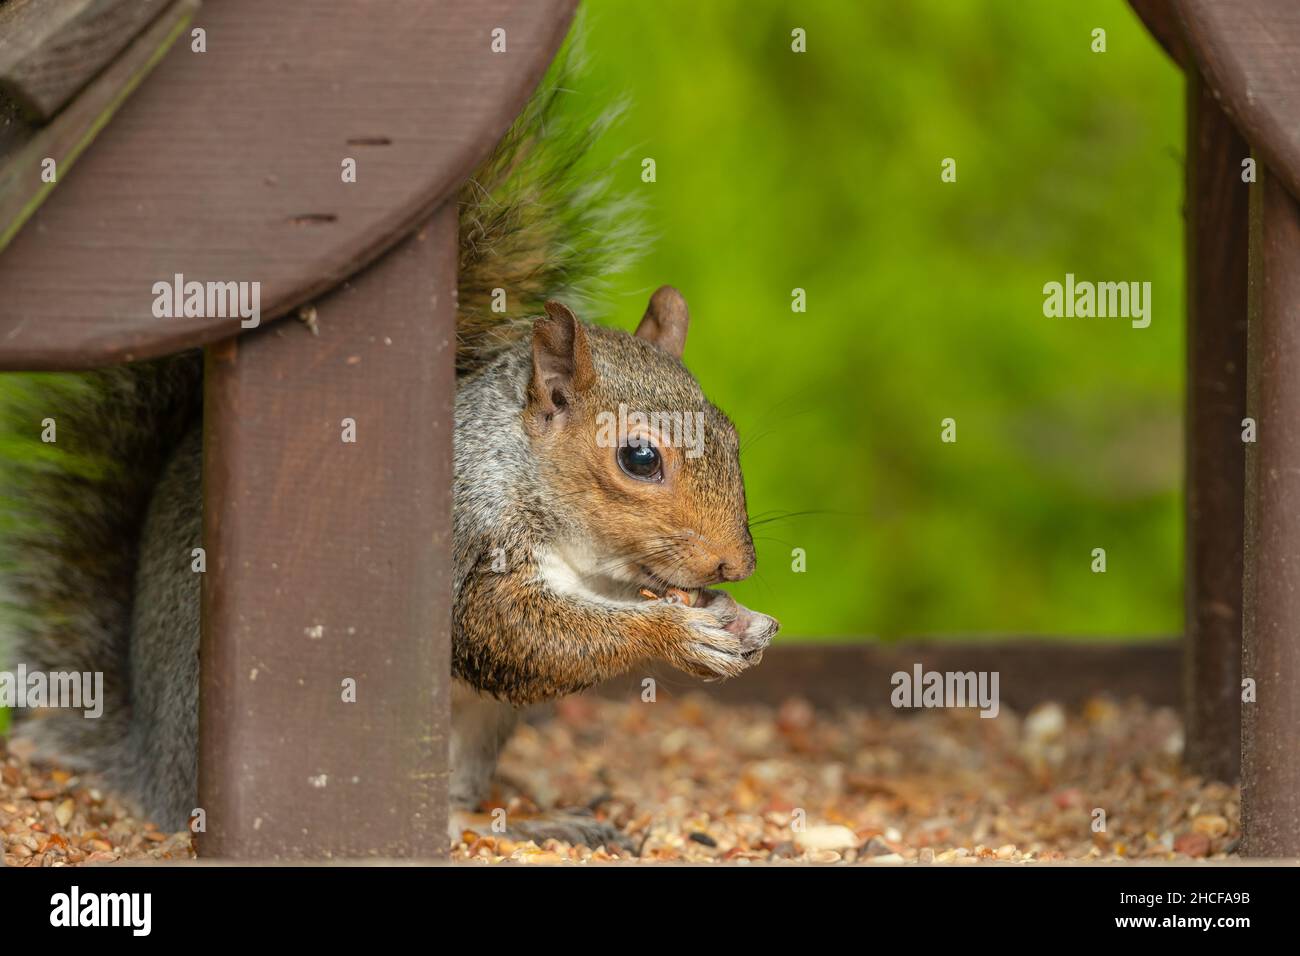 Close up of a grey squirrel eating nuts and seeds inside a bird feeding  table.  Facing right and holding a peanut.  Scientific name : Sciurus carolin Stock Photo